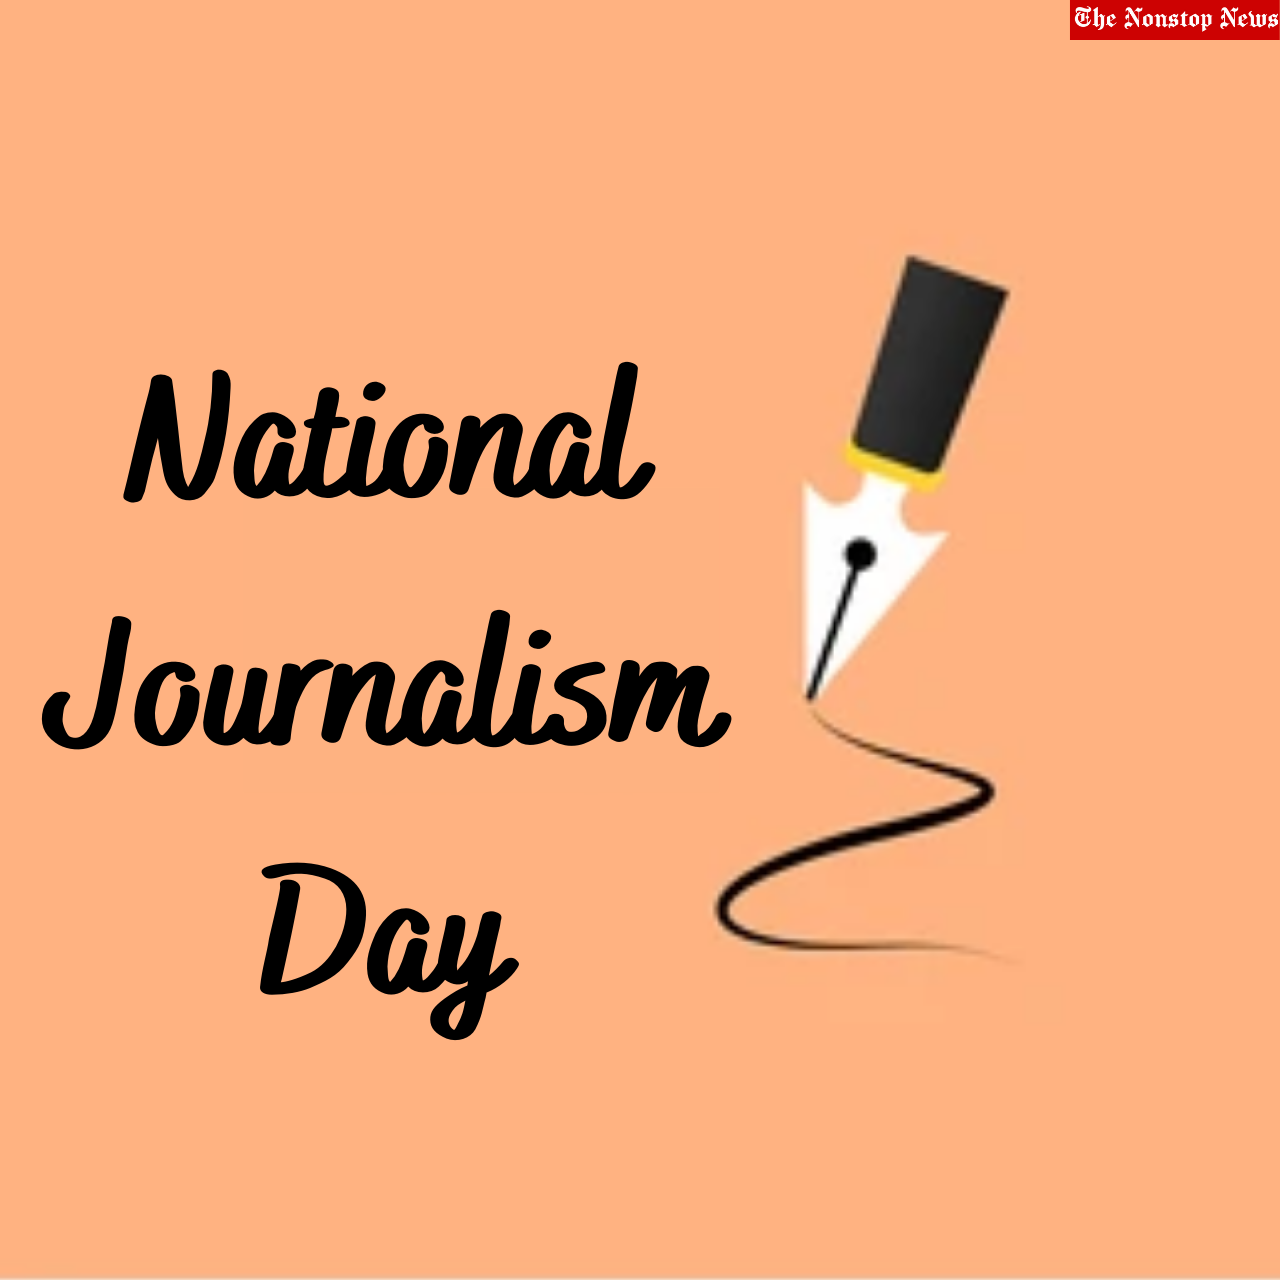 National Journalism Day 2021 Wishes, Quotes HD Images, and Messages to Share